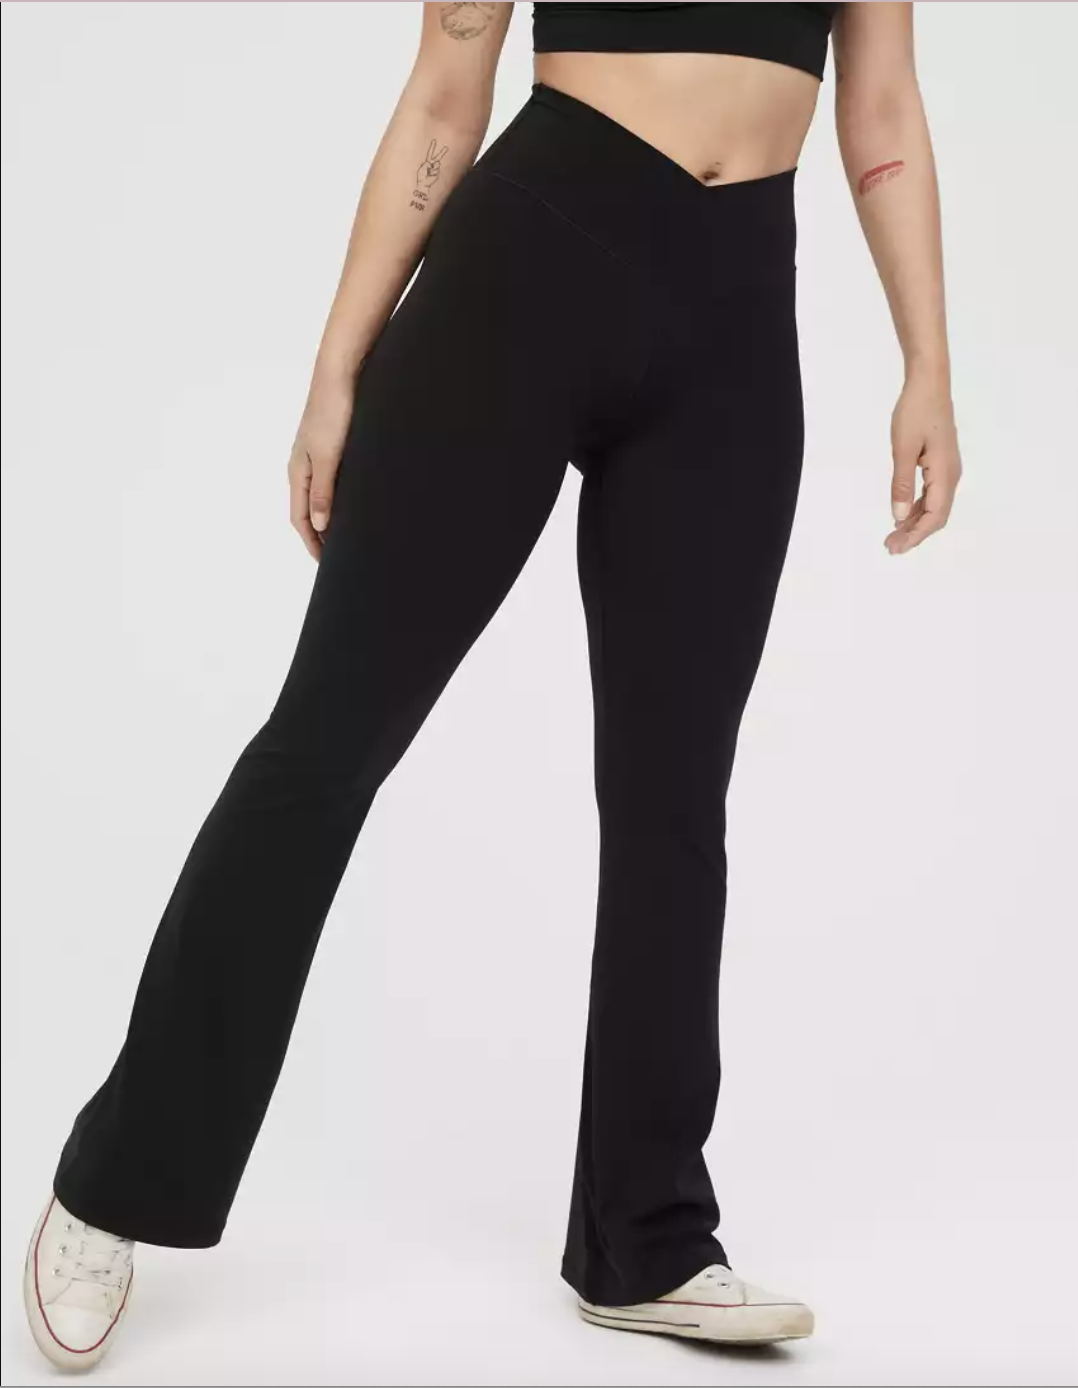 BRAND: Wear It To Heart Patterned Full Length Yoga Pants PRICE: $22 SIZE:  Medium- fits 6/8 MEASUREMENTS: 28